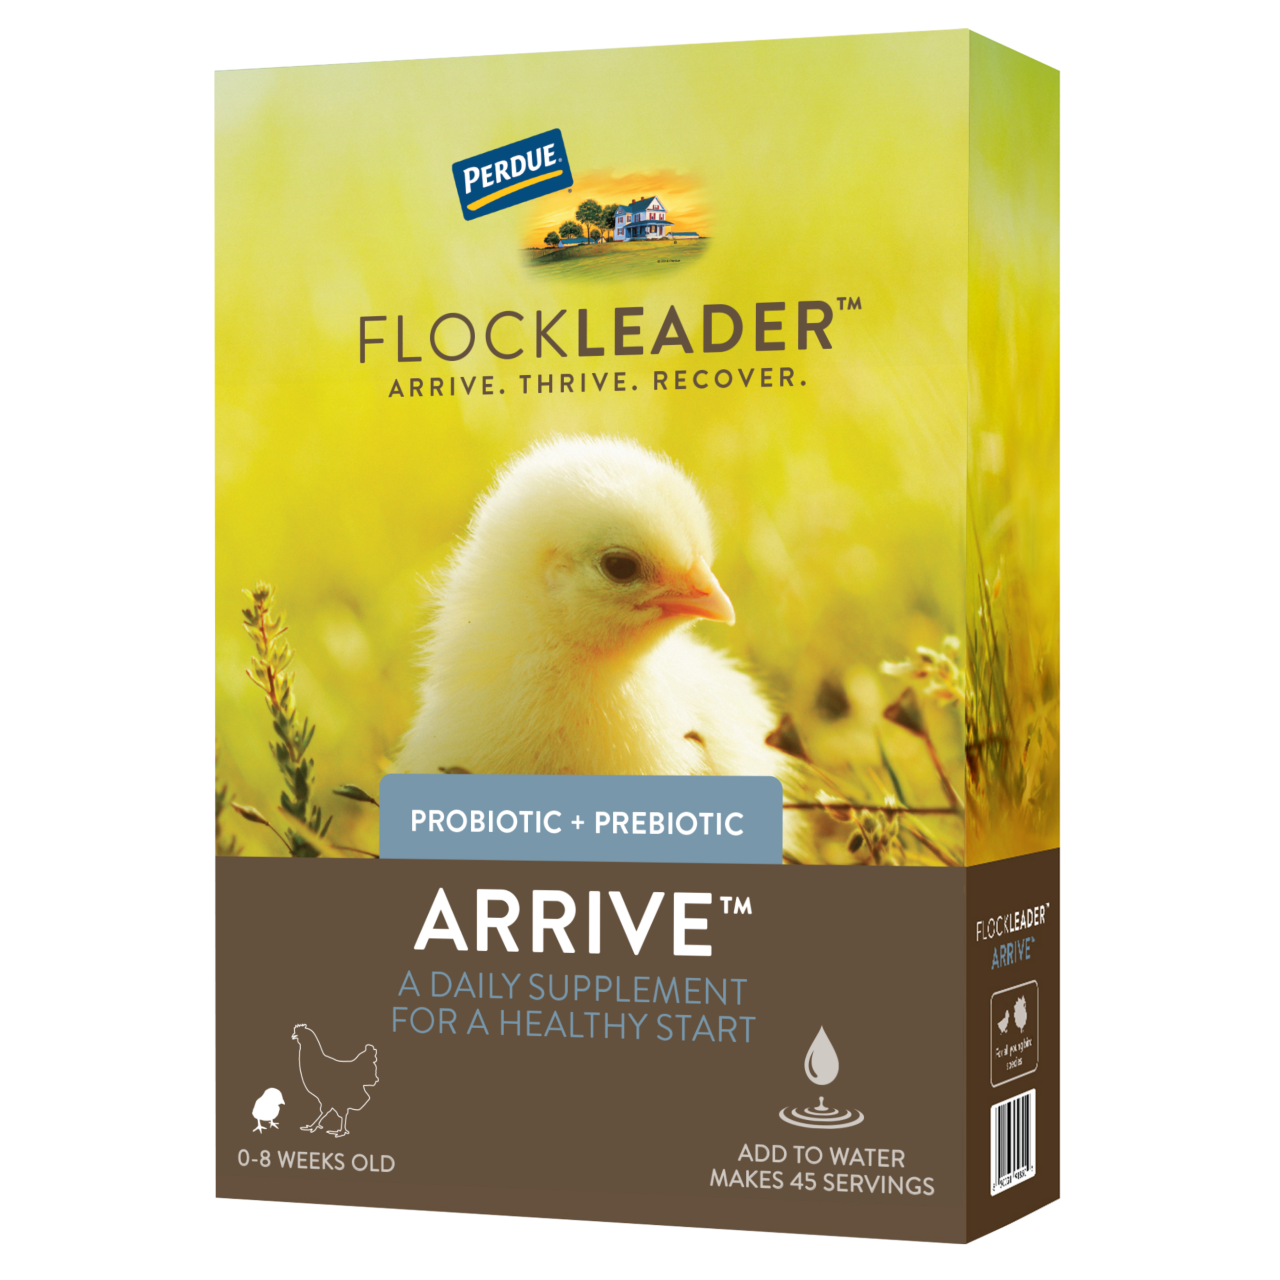 Image of Flockleader Arive Daily Support for Chicks.